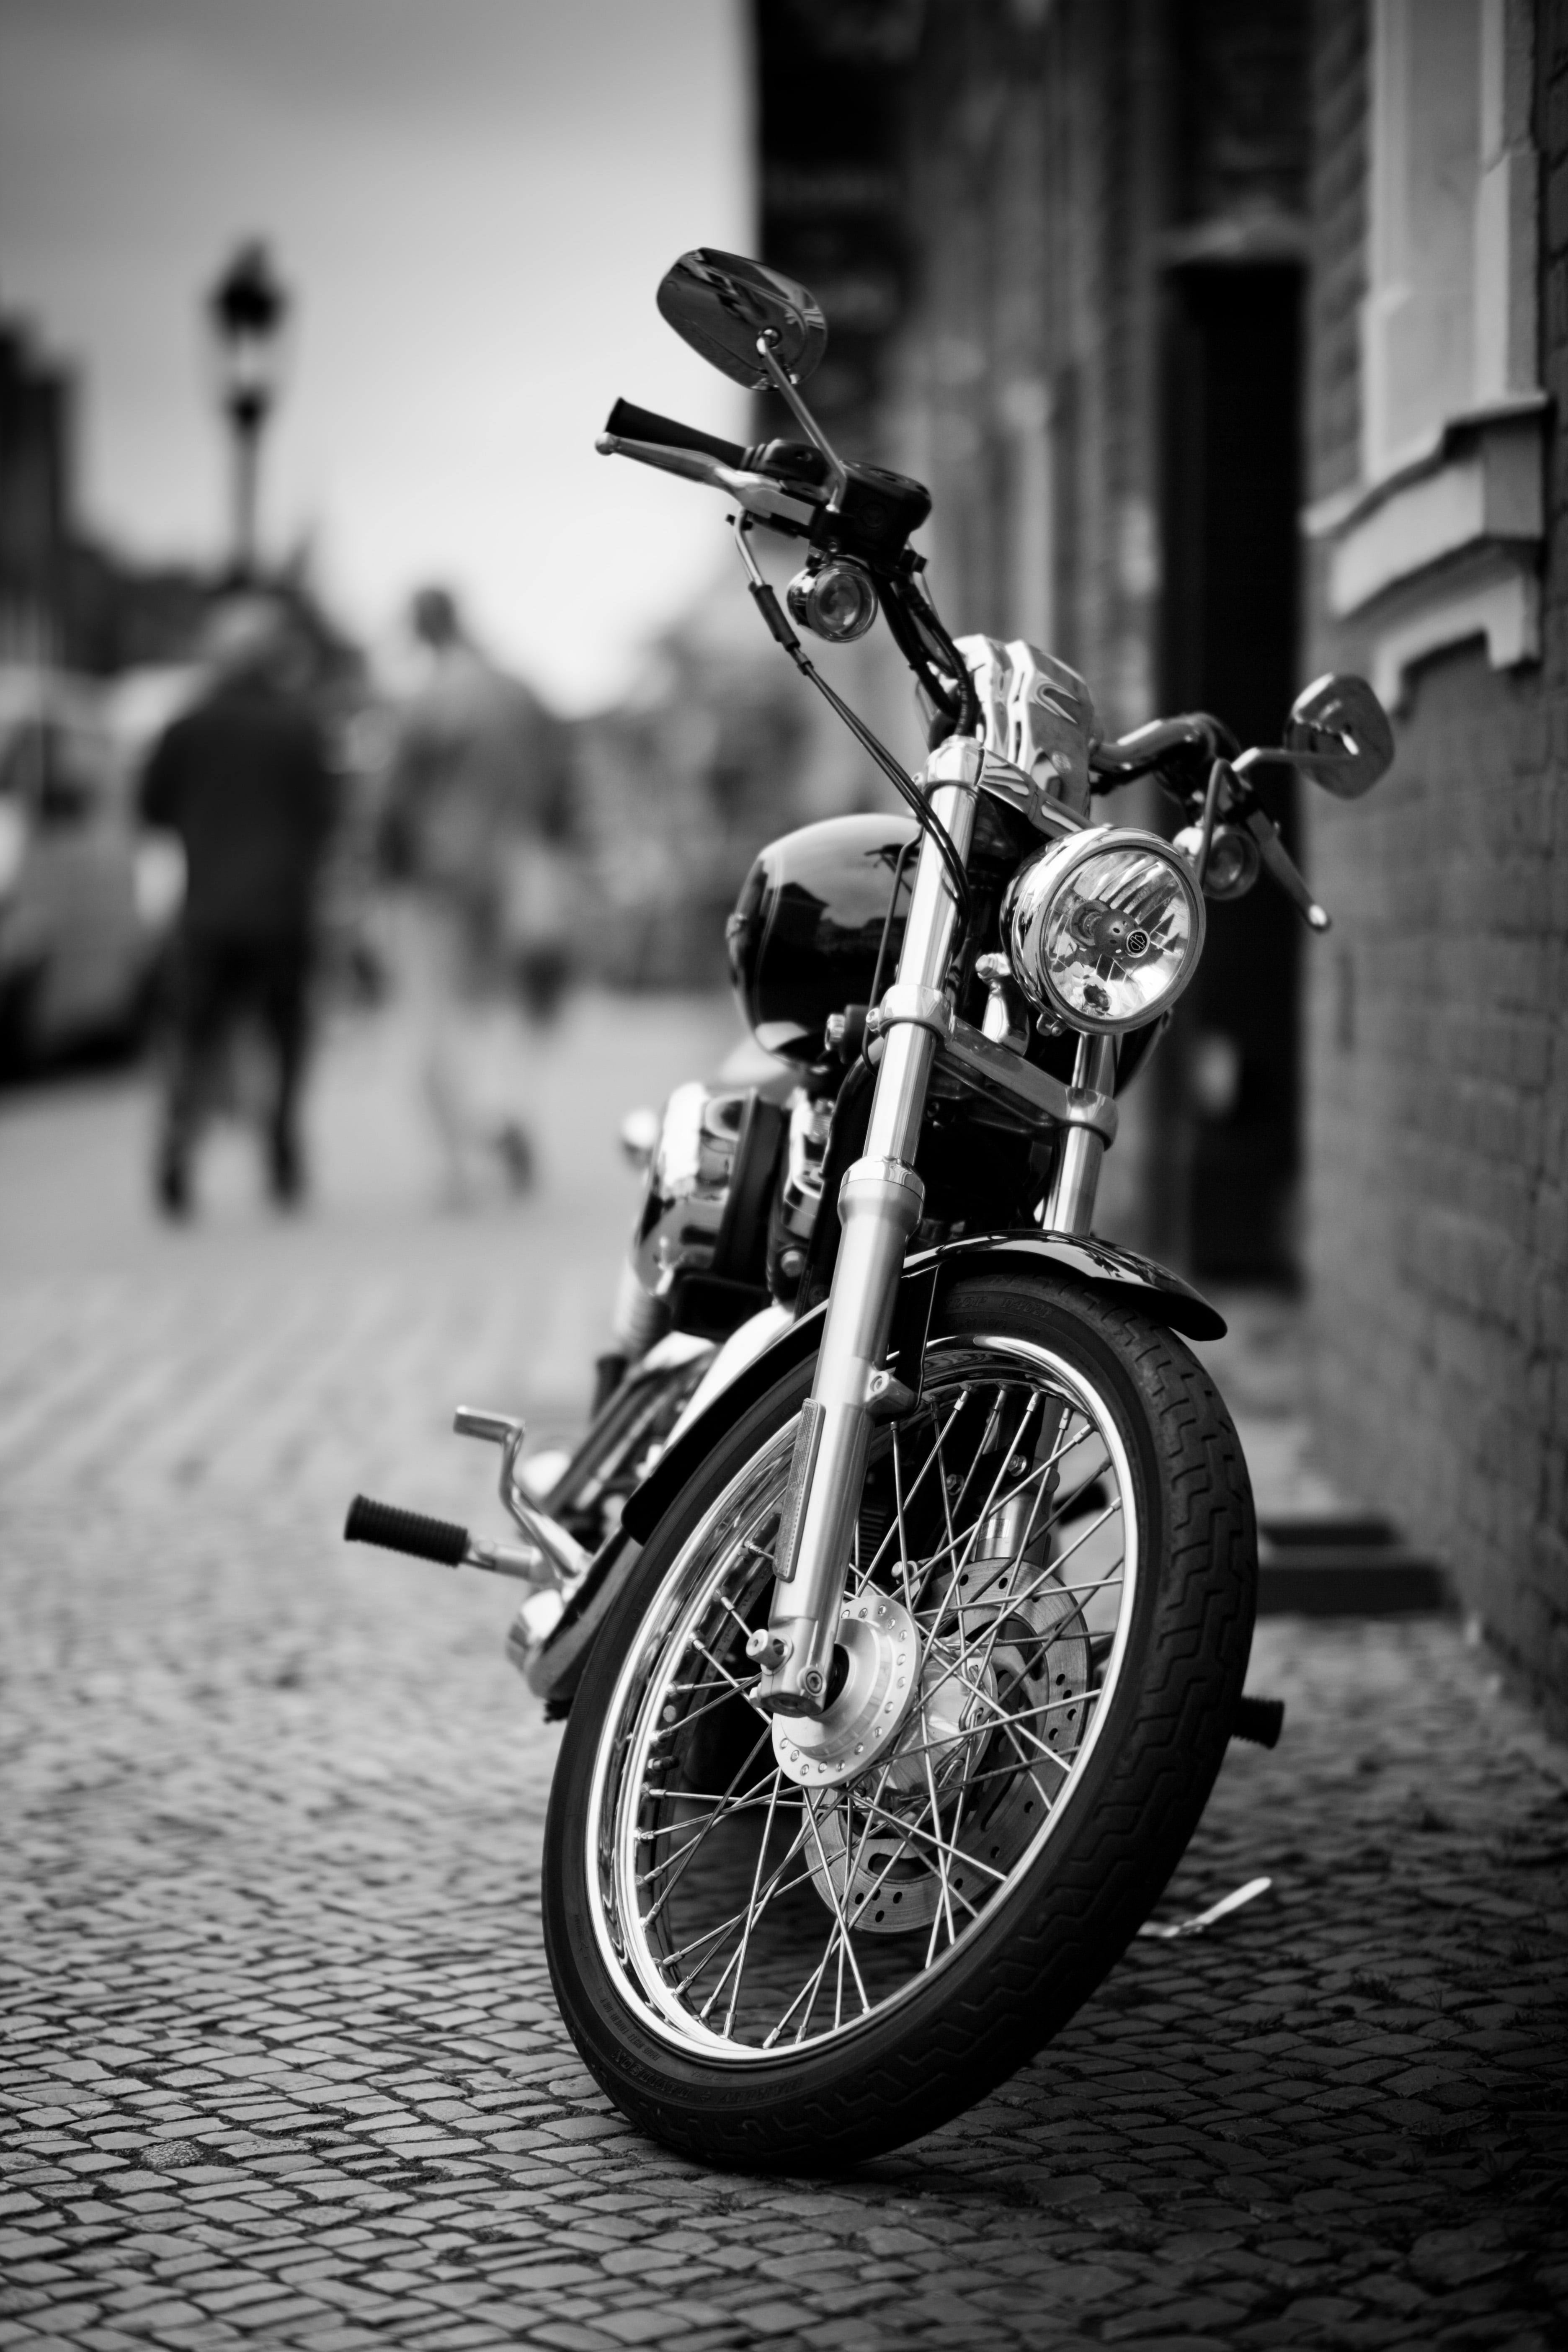 black and white photo of a motorcycle, bike, motorrad, chopper